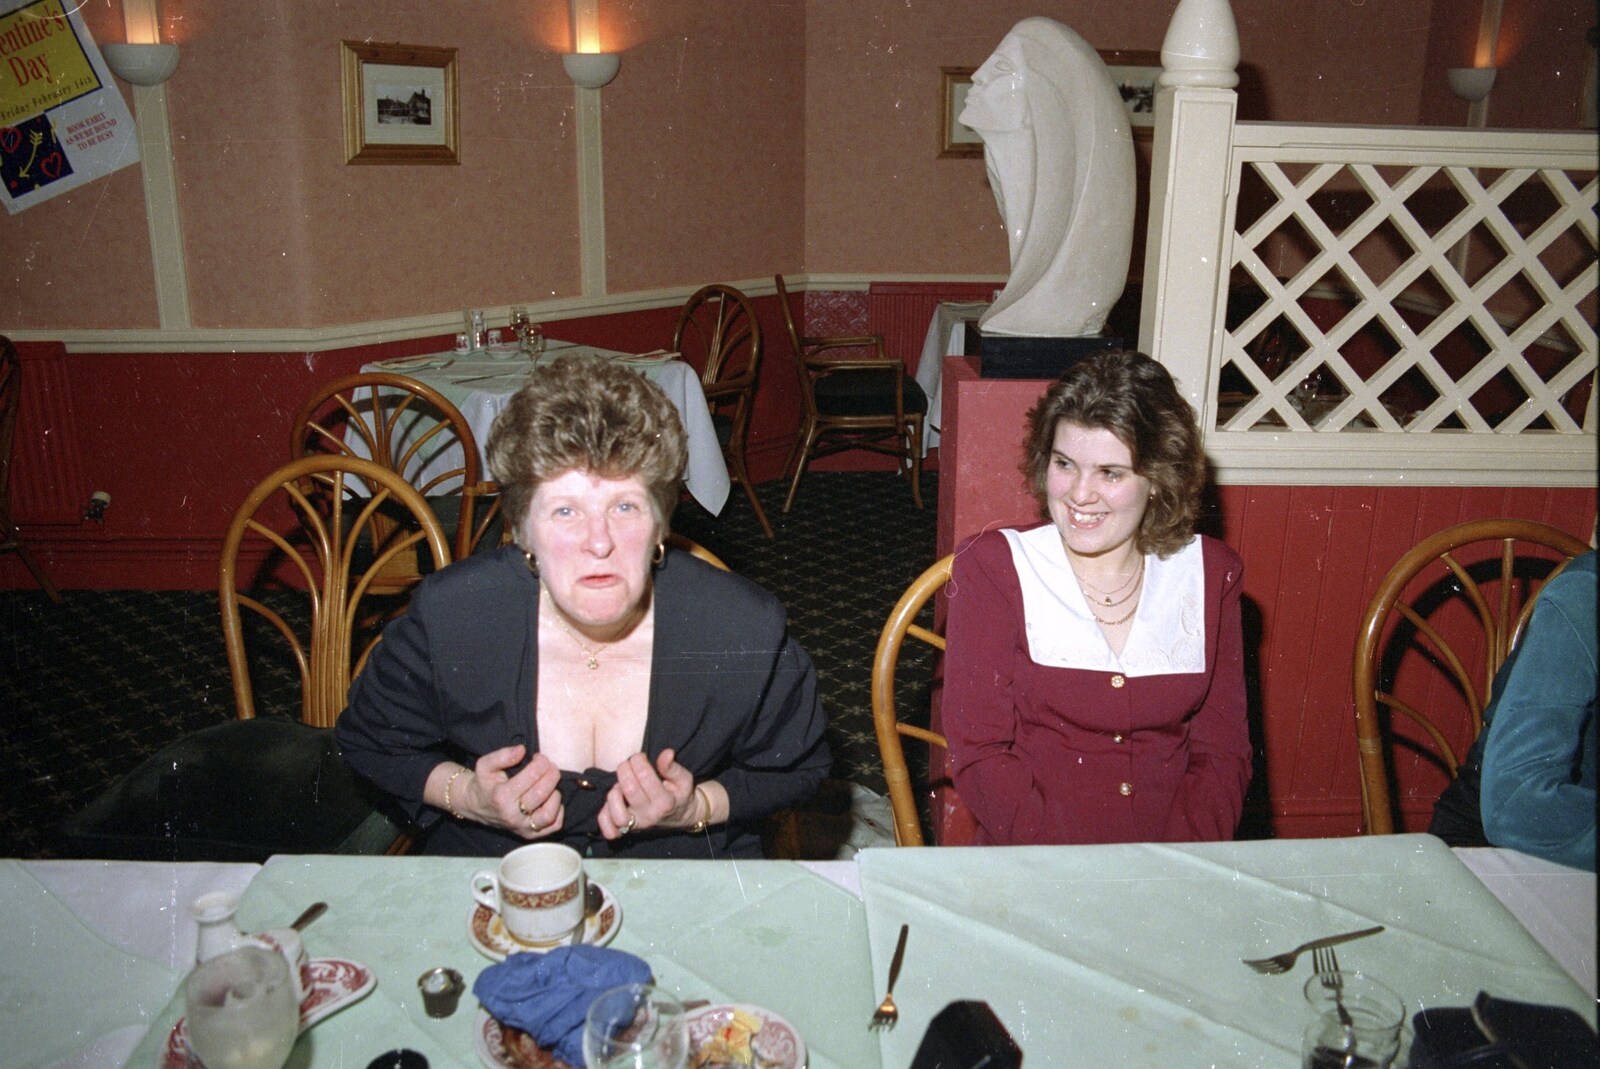 Pam Frosdyke pretends to get her boobs out from Printec at the Park Hotel, Diss, Norfolk - 14th January 1992